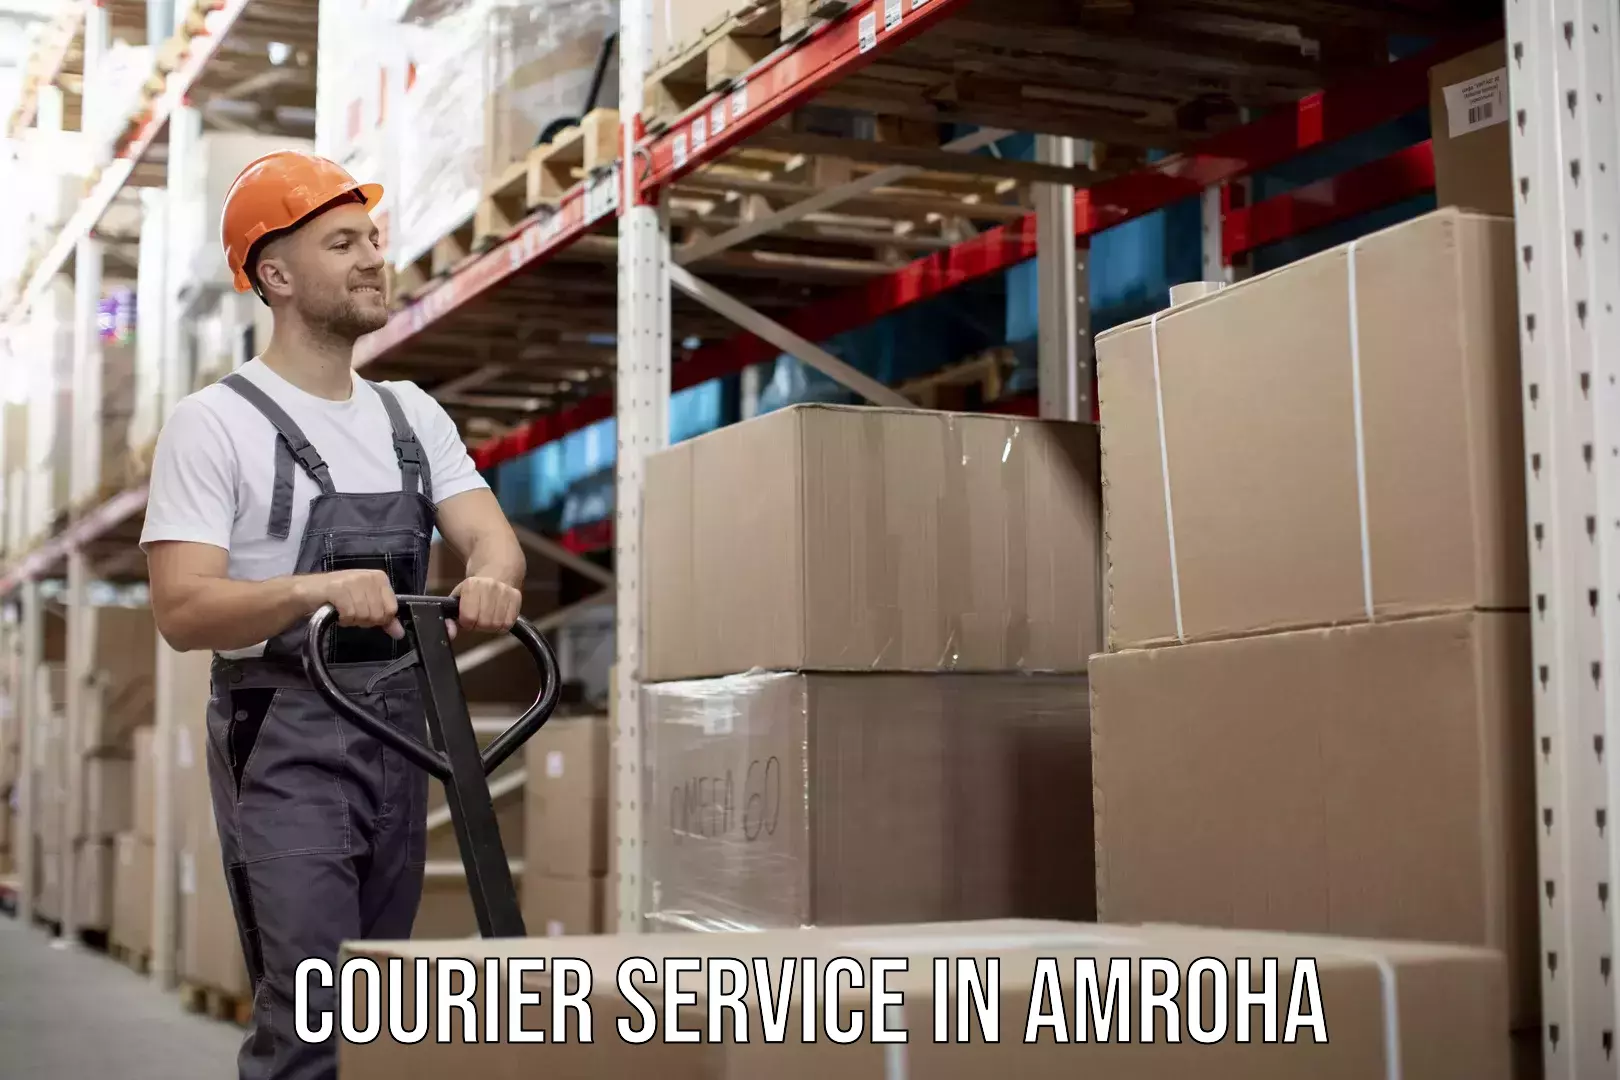 Ground shipping in Amroha